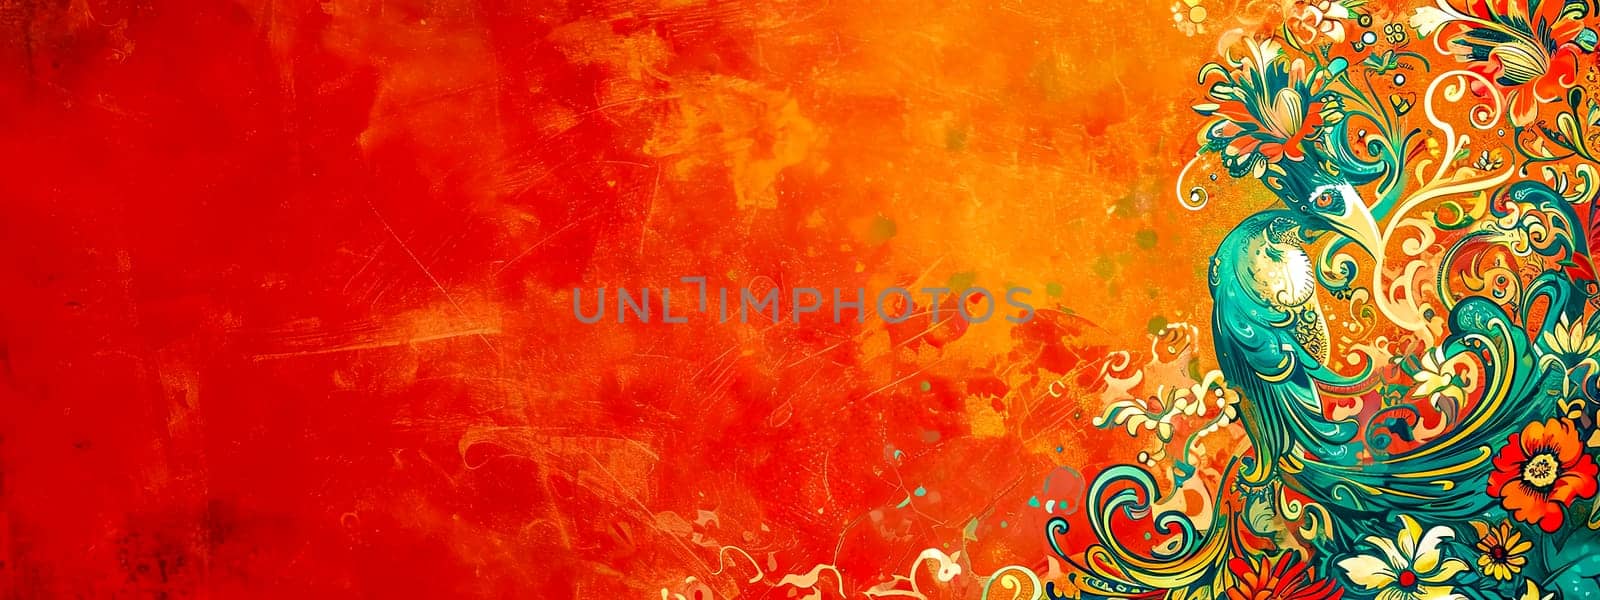 ornamental peacock design with floral motifs on a textured red background, creating a decorative and elegant composition, copy space